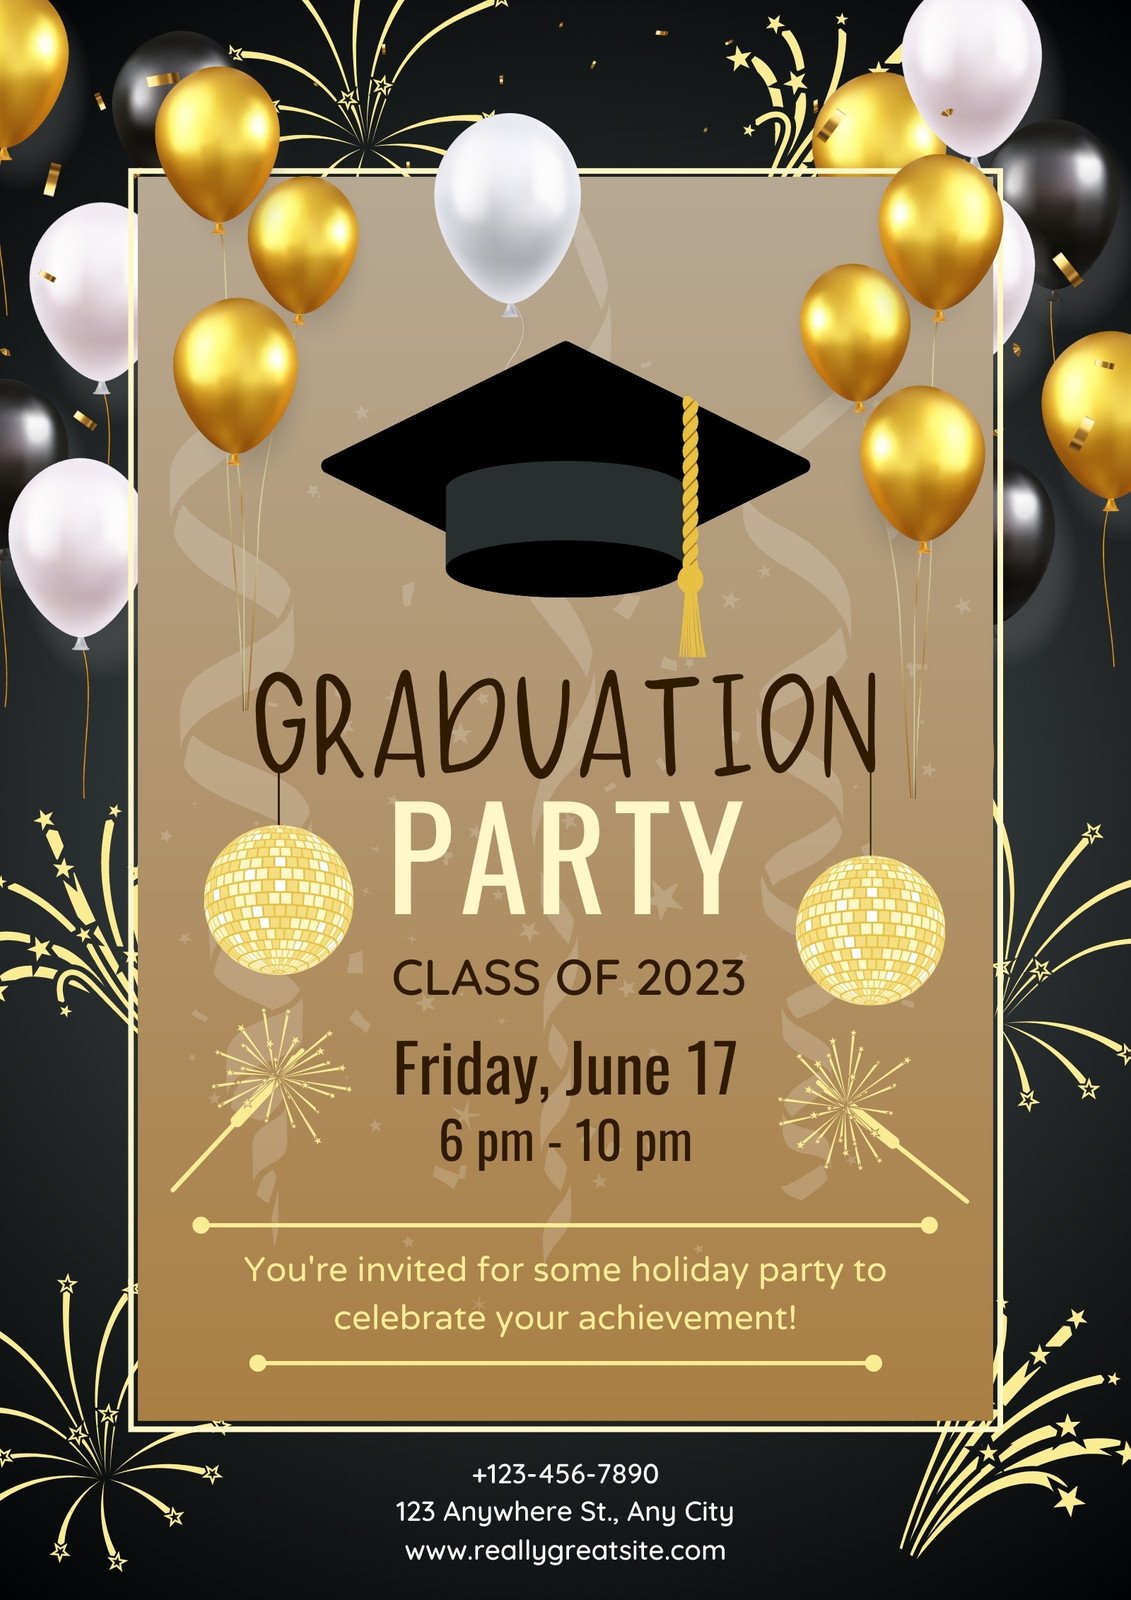 Golden And Black Illustrated Happy Graduation Day Party Invitation Flyer